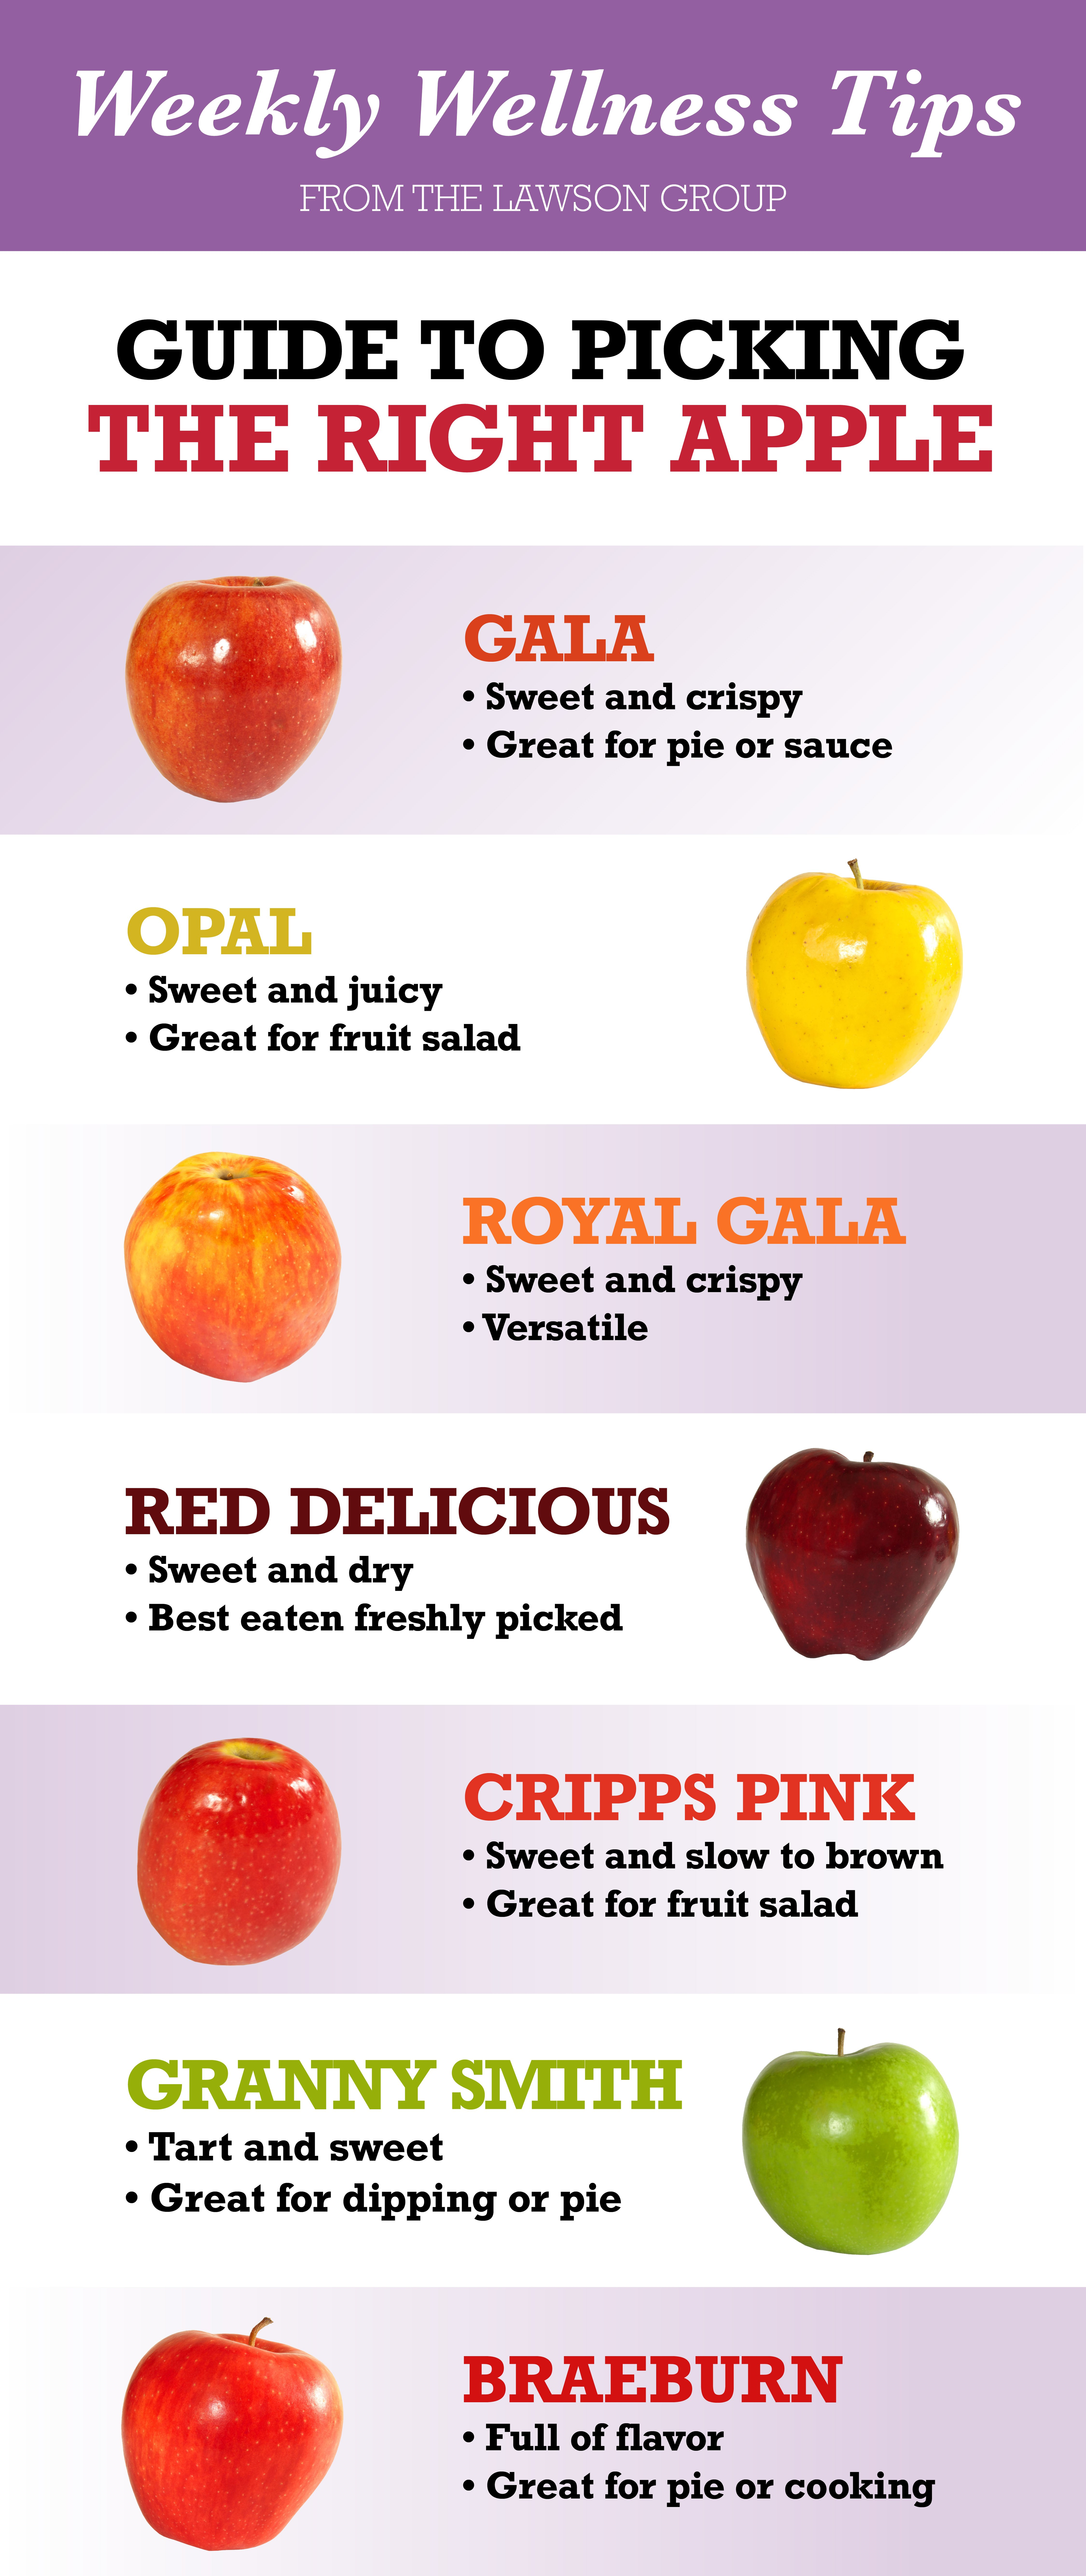 TLG22005 Wellness Tips Apple Picking Infographic-1080px-01